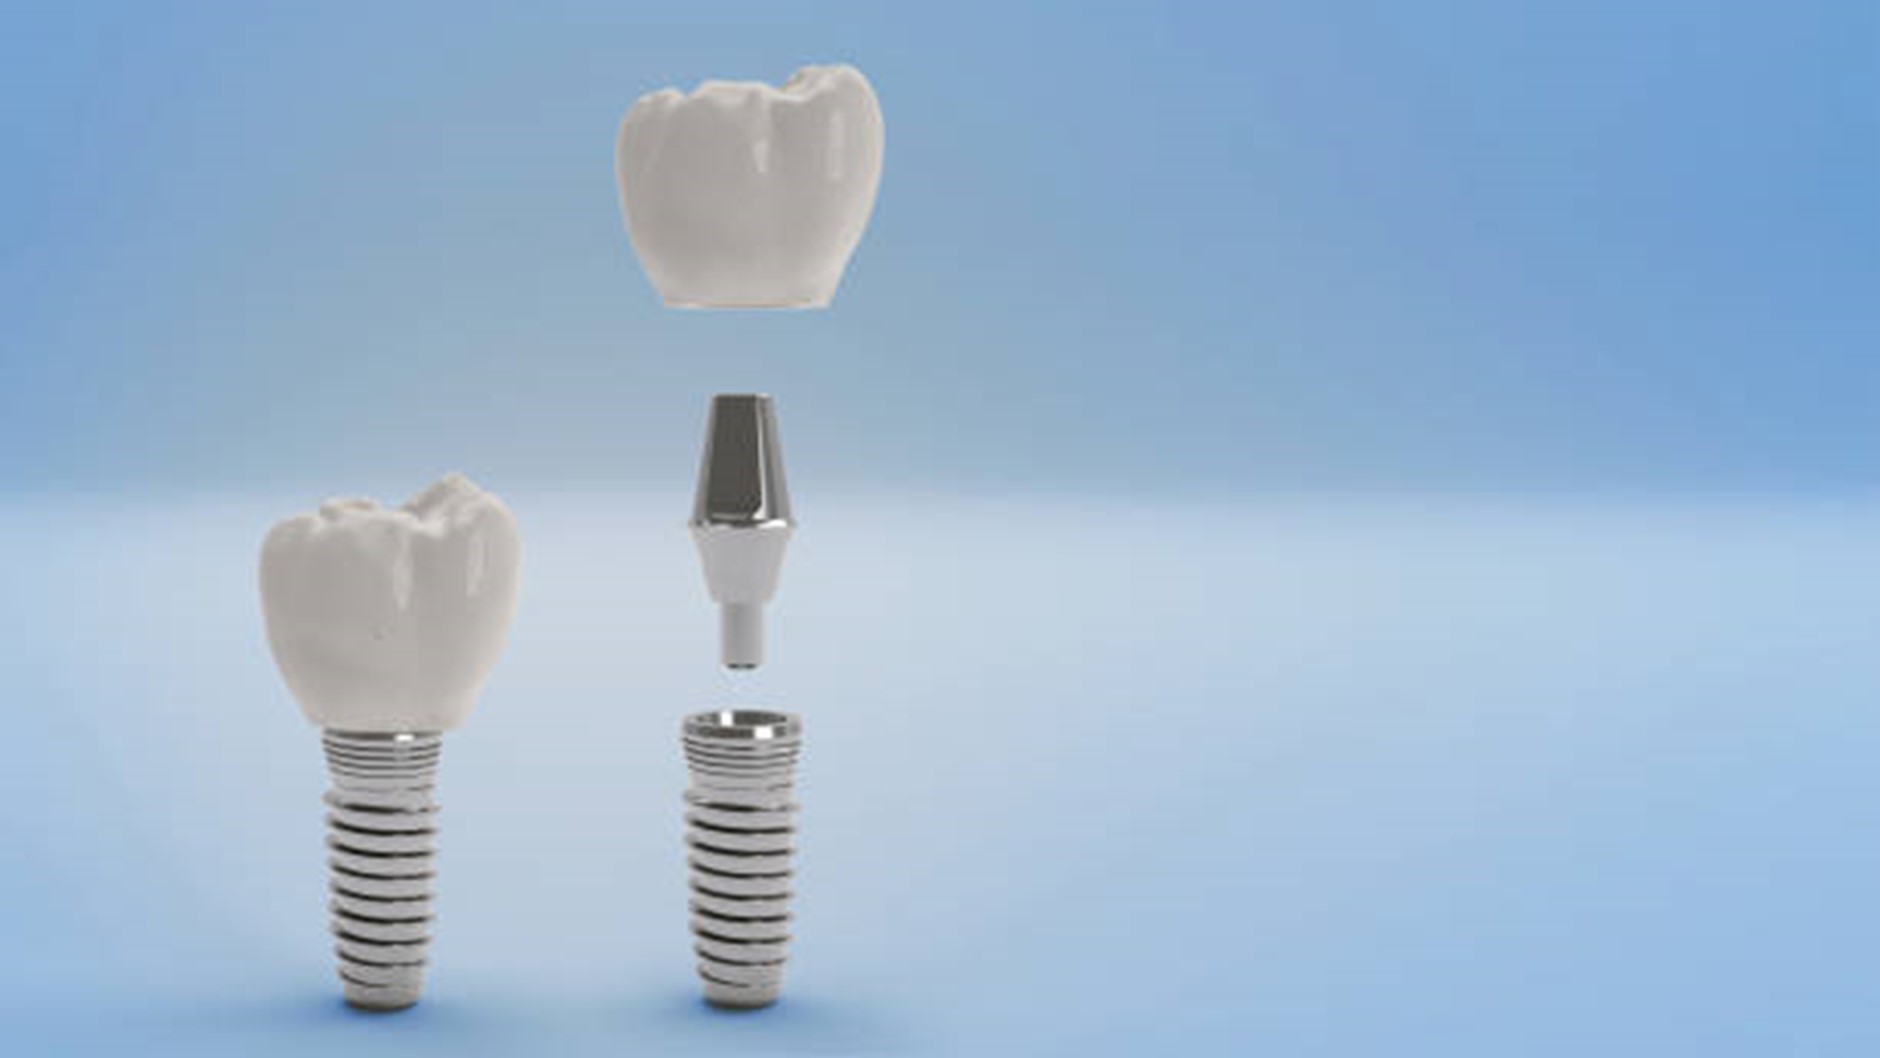 10 Lesser-Known Facts About Dental Implants